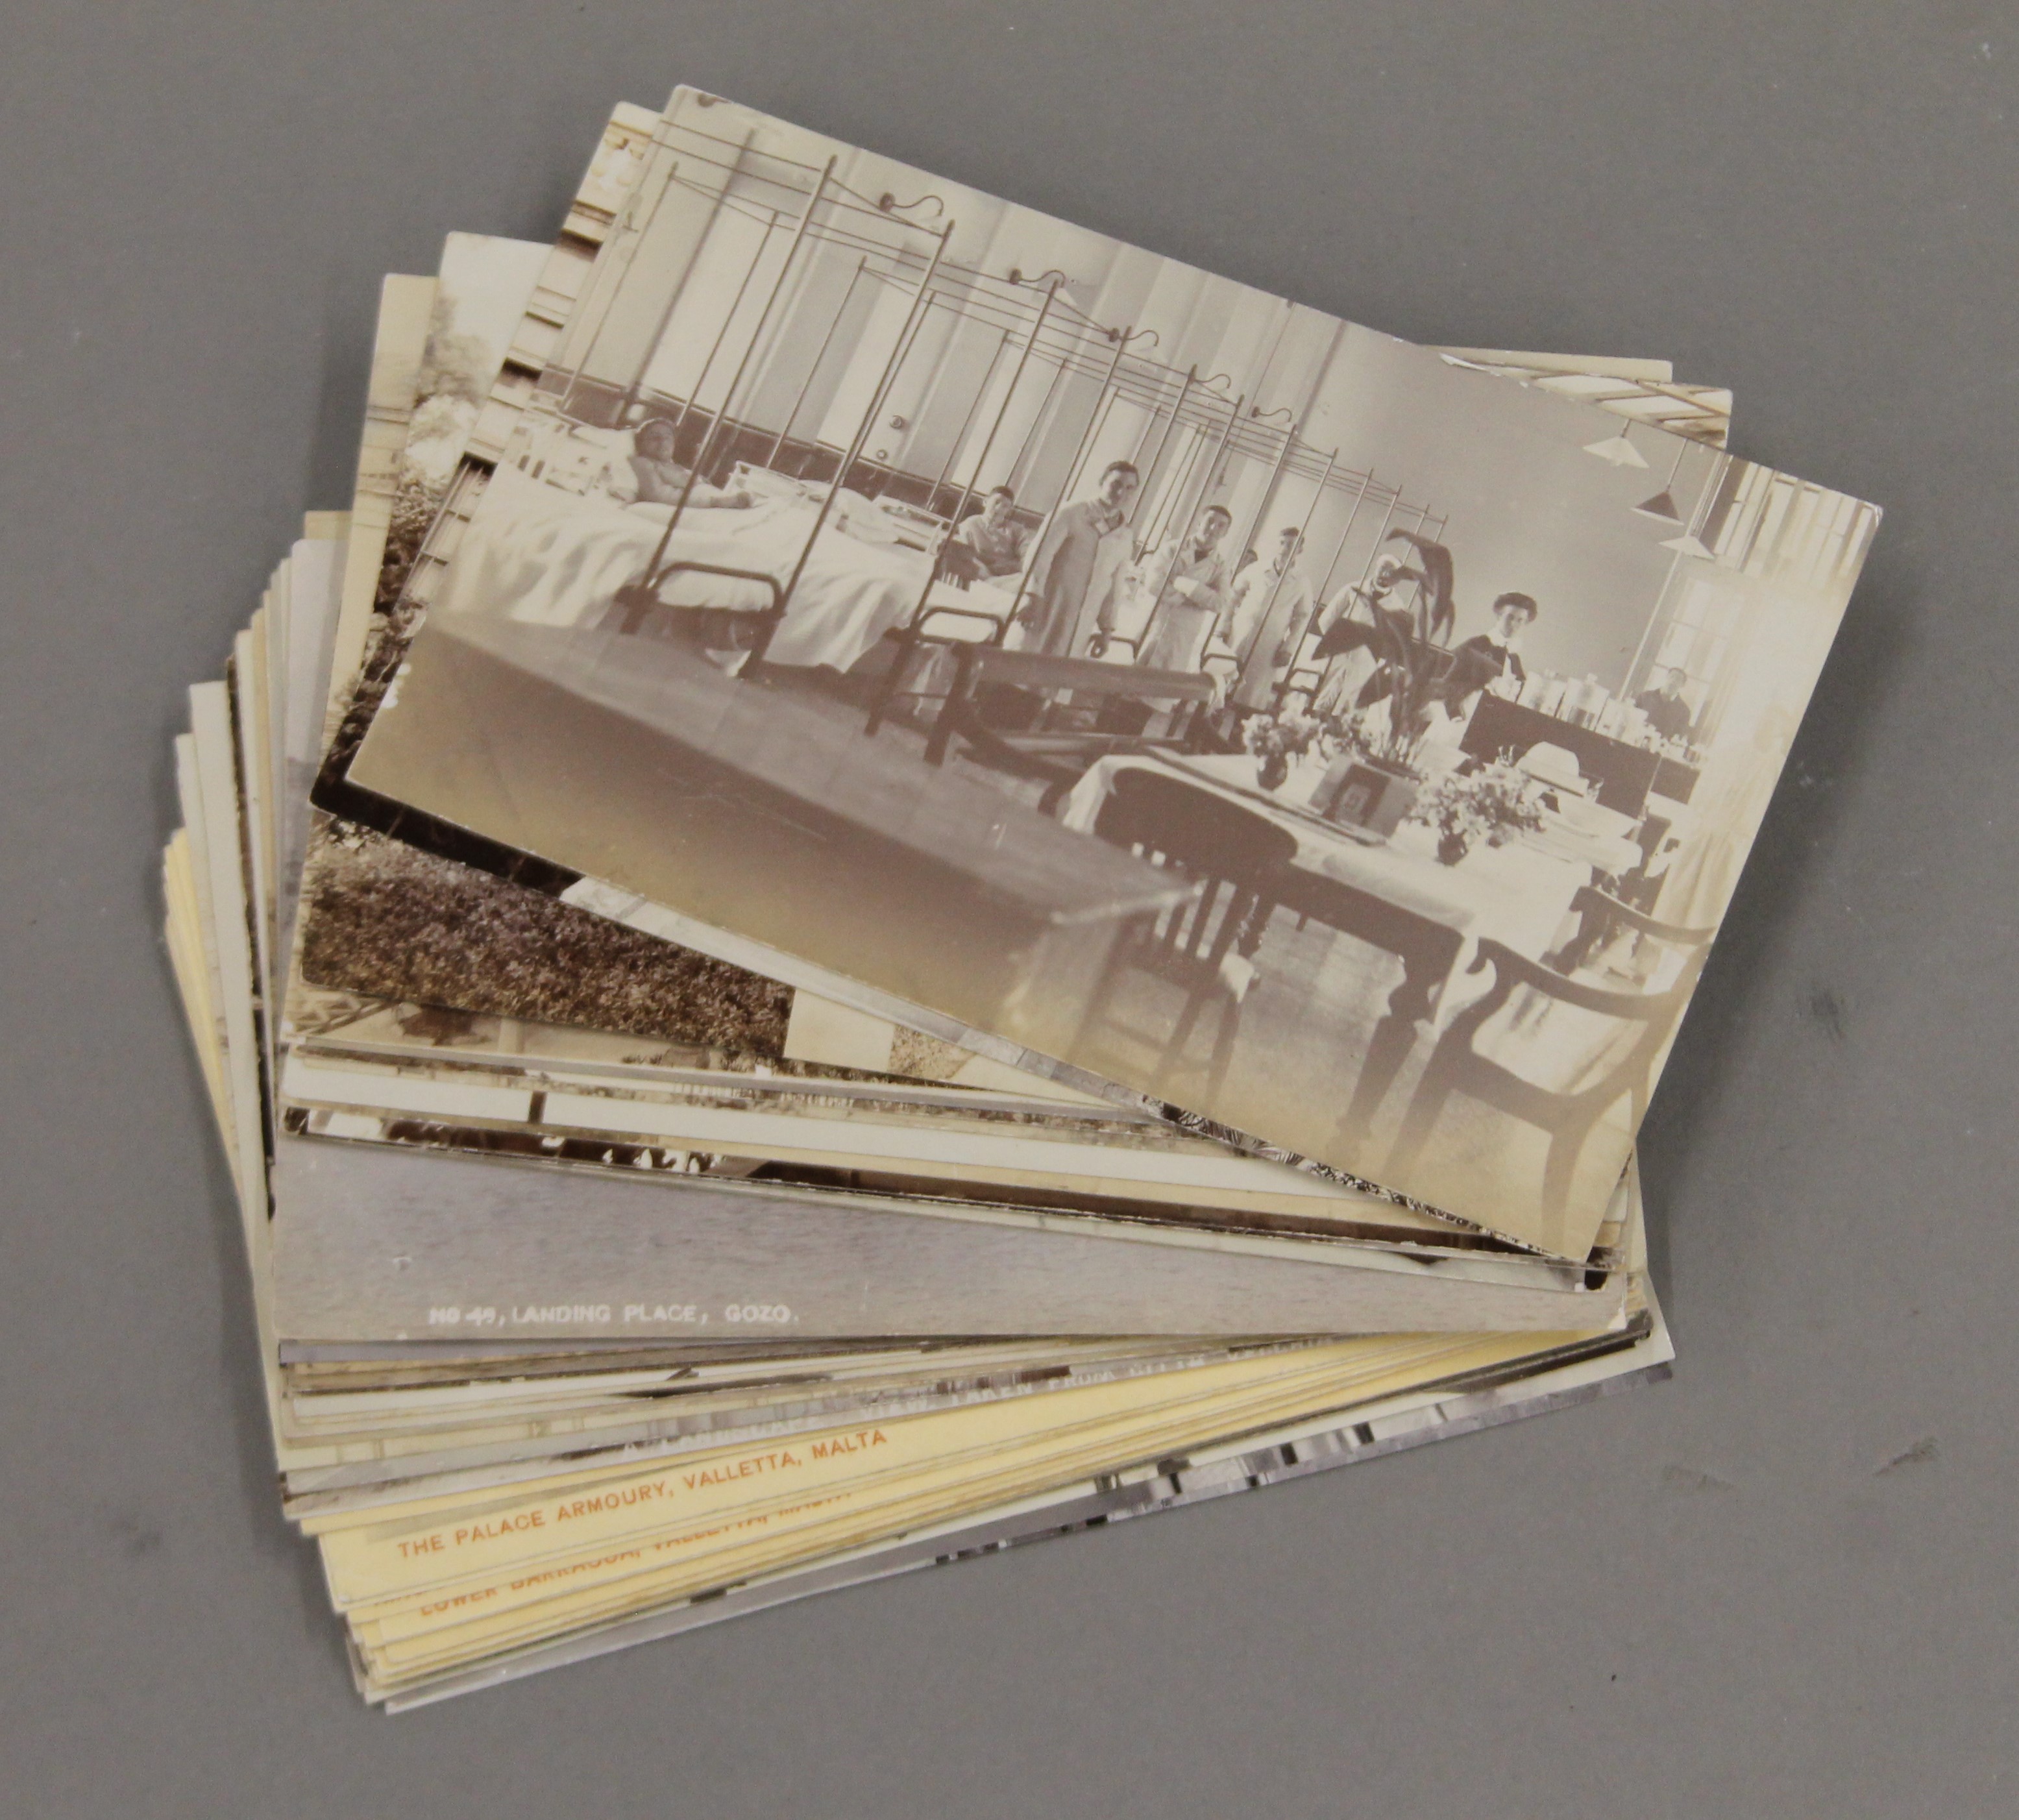 A collection of Malta Pre-War postcards, many from real photographs, includes the Naval Hospital.